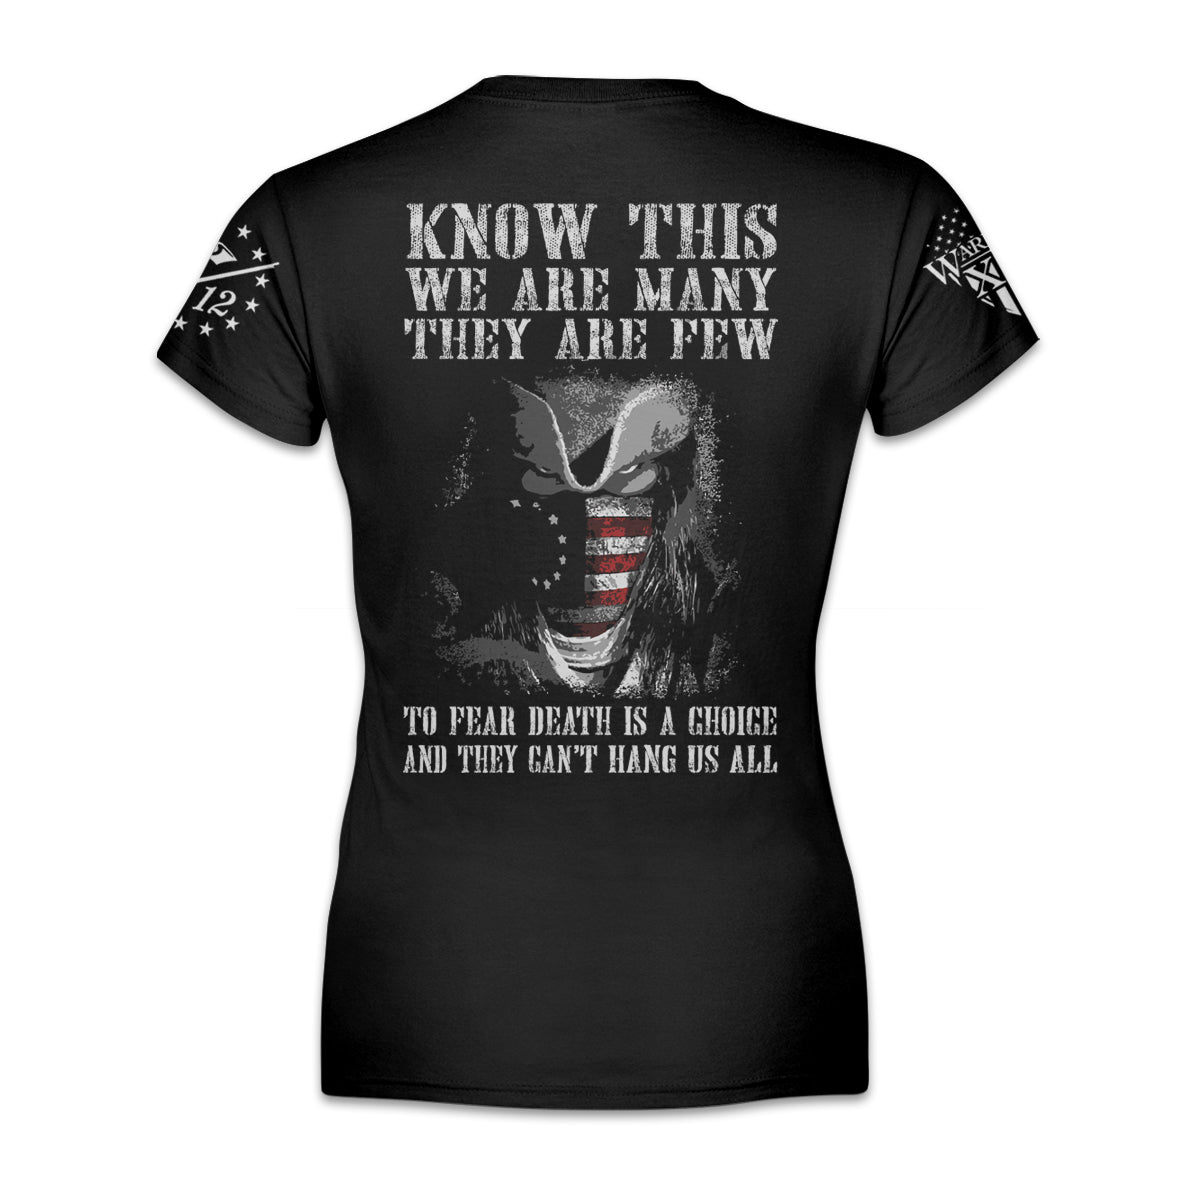 A women's black t-shirt with the words, "Know This, We Are Many They Are Few. To Fear Death Is A Choice, And They Can't Hang Us All" printed on the back of the shirt.